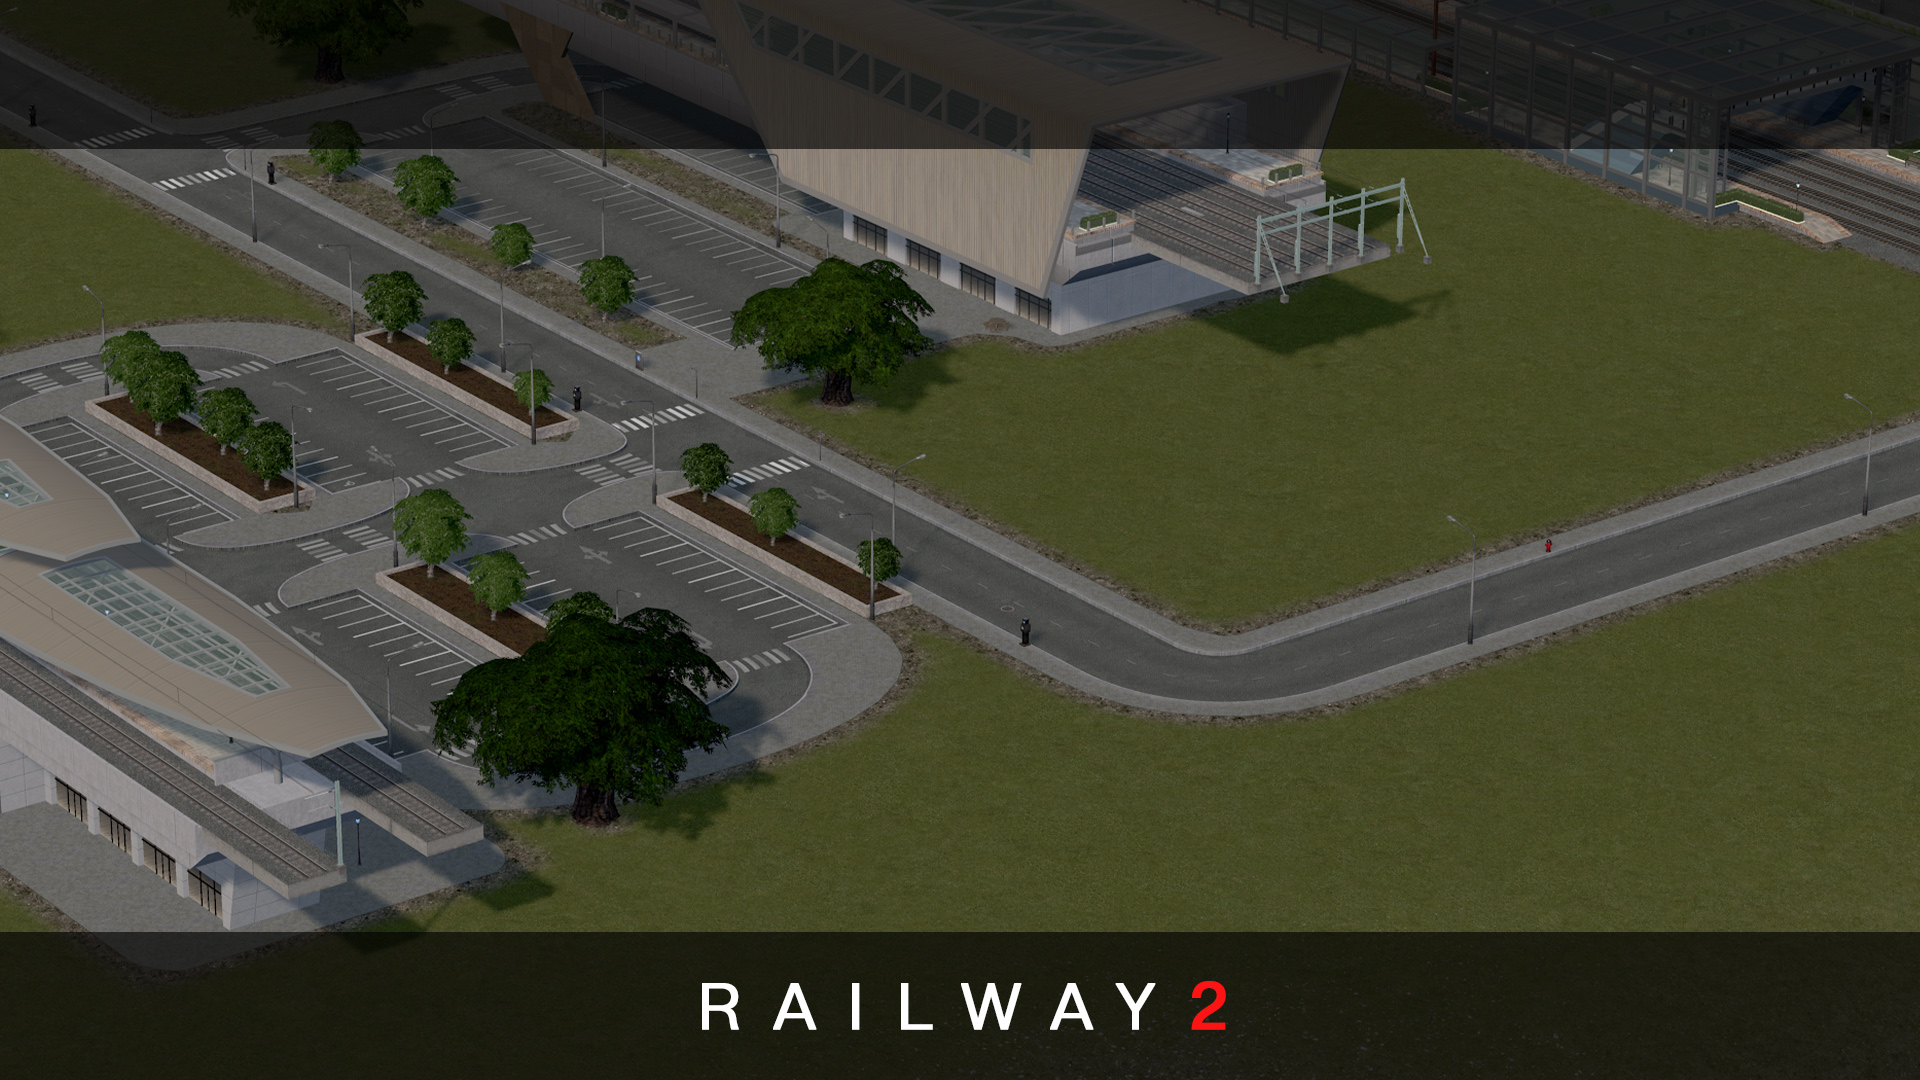 Cities: Skylines List of Railway 2 + Features + Modding Tutorial Information - 6. Stations: Tracks variants, Replacer and Platforms - 91A4AF8